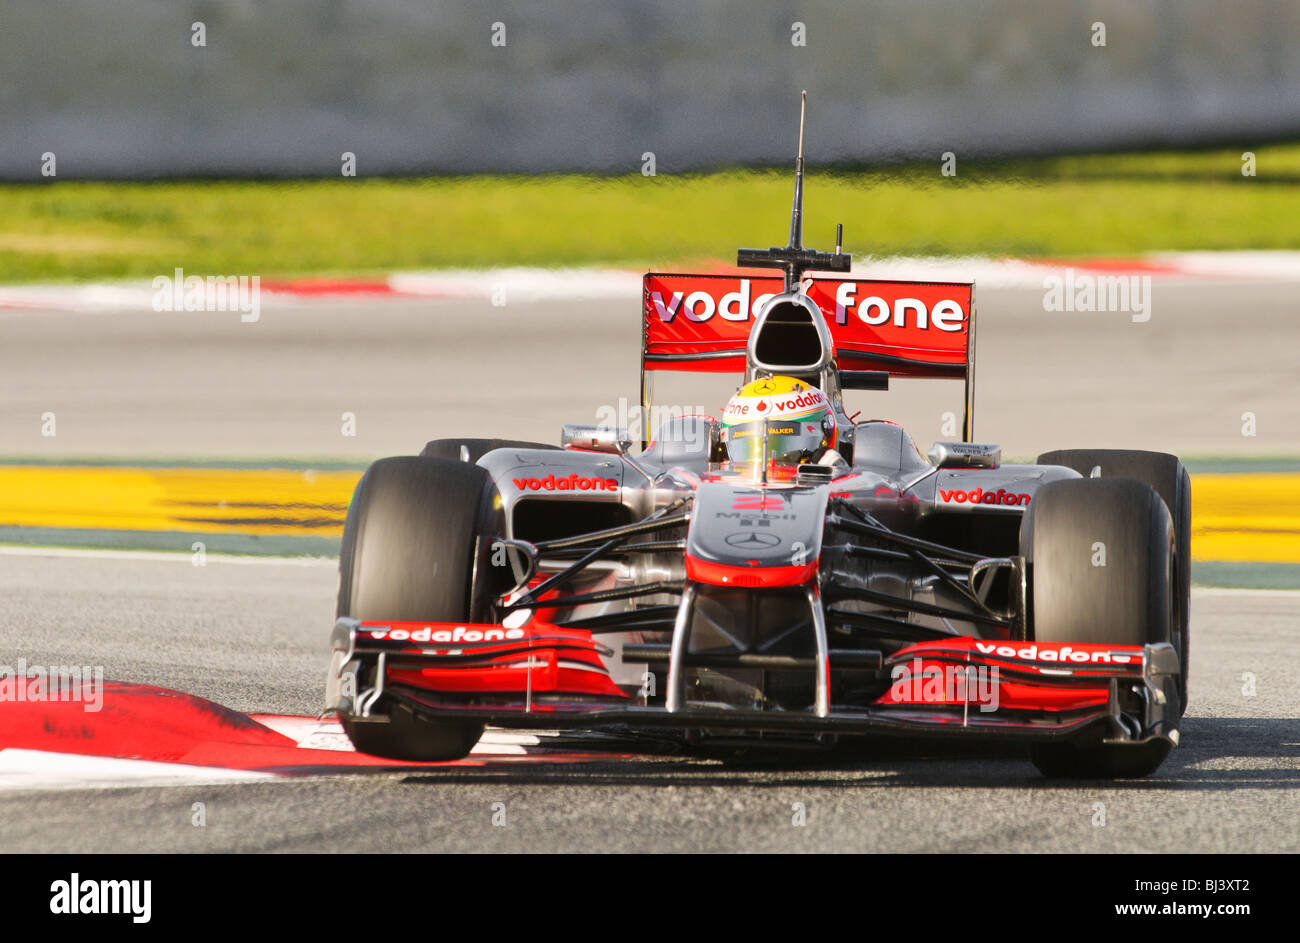 Lewis HAMILTON (GB) in the McLaren-Mercedes MP4-25 race car during Formula 1 Tests Stock Photo